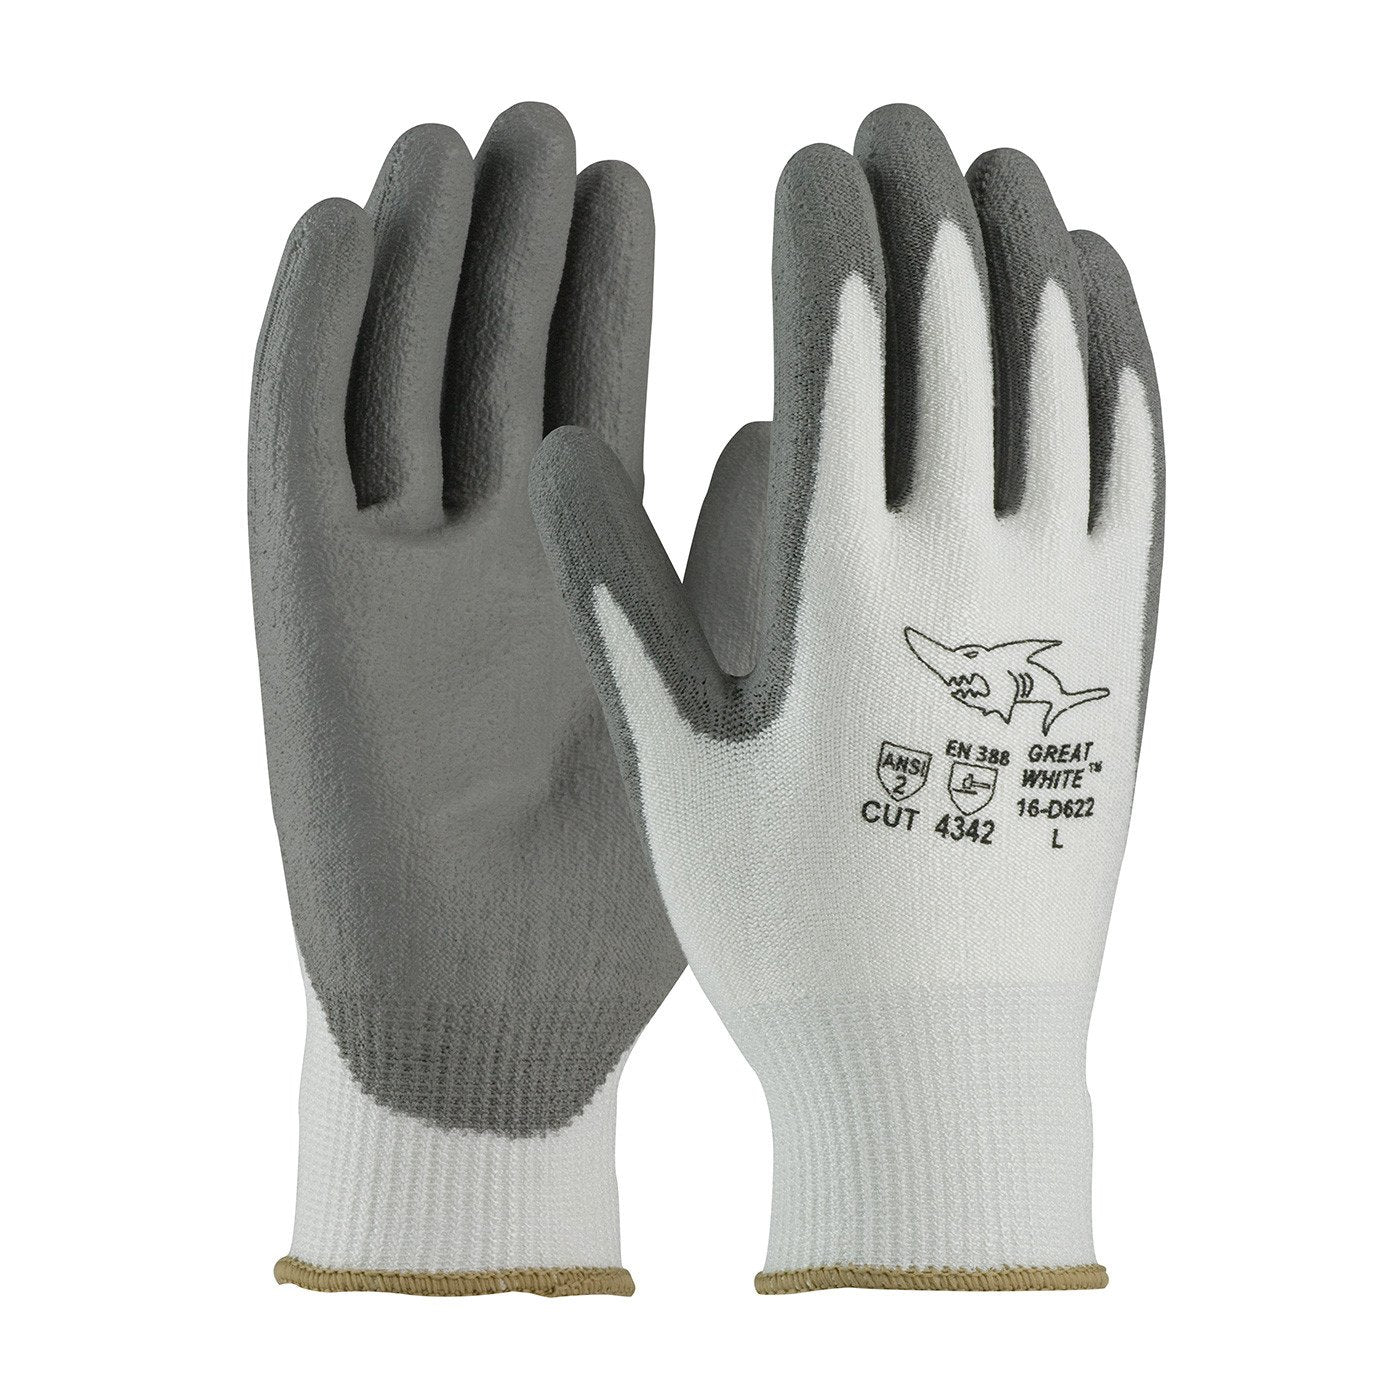 Great White 16-D622 PolyKor Cut Resistant Glove